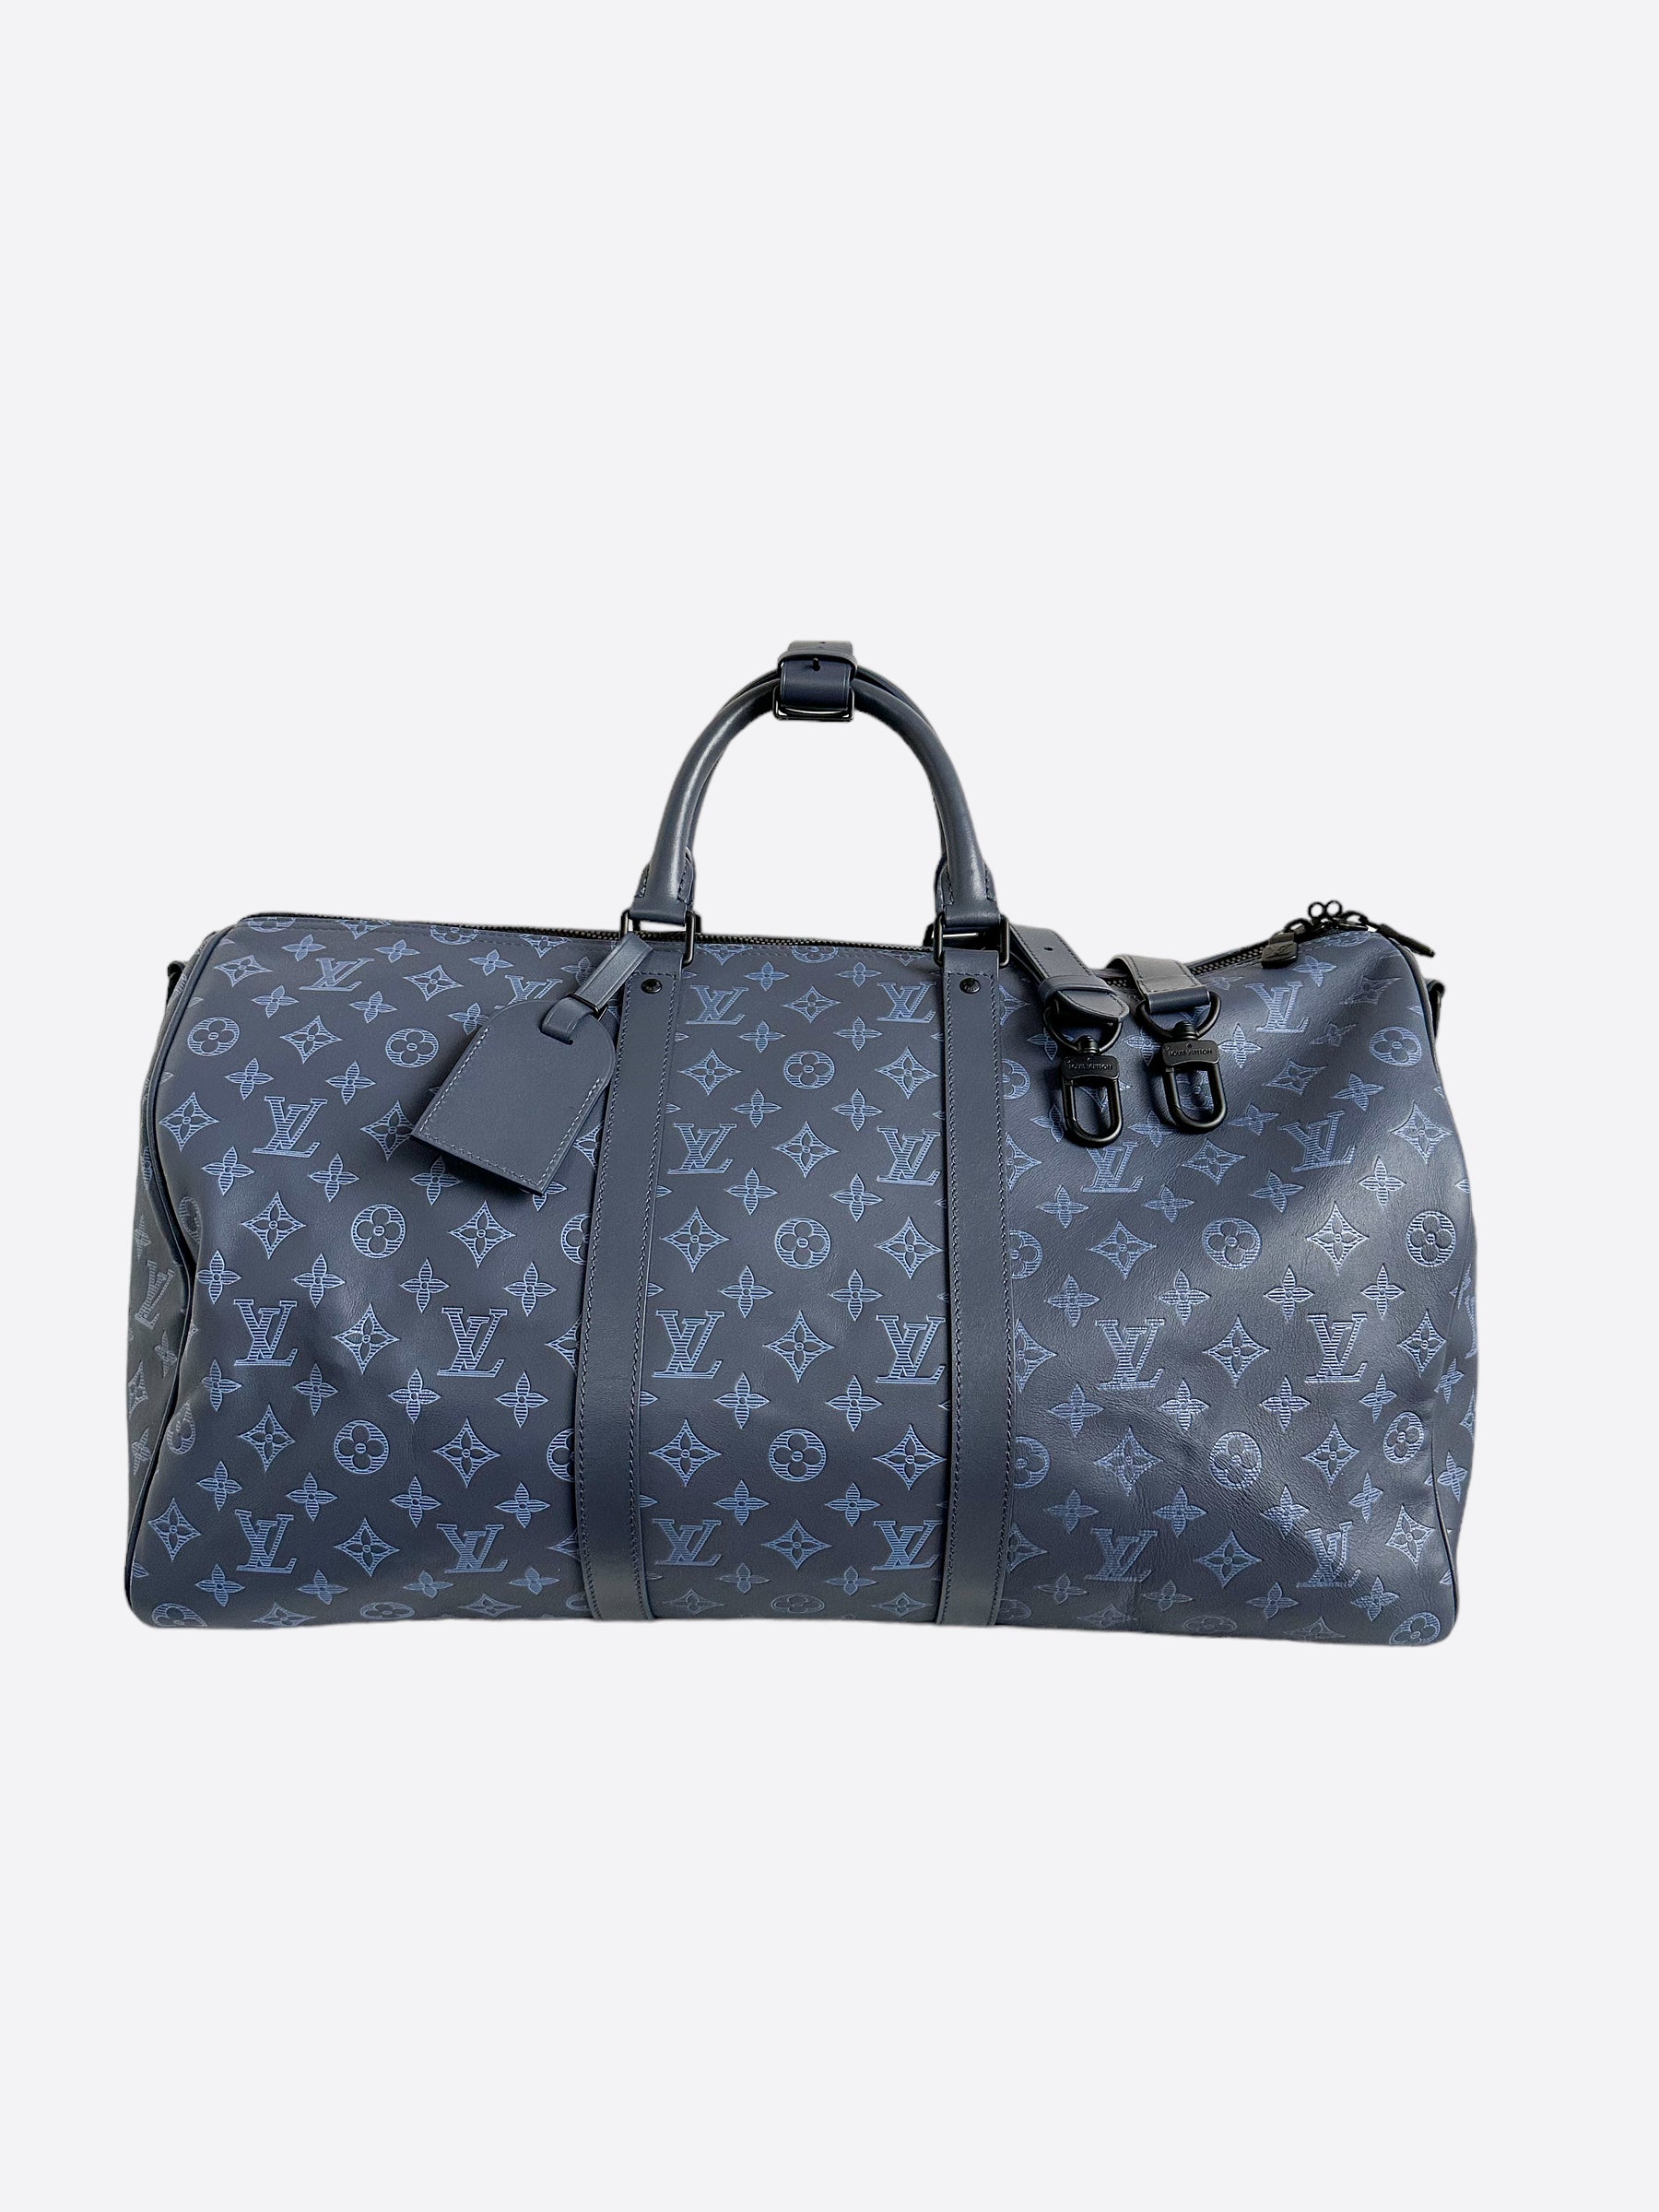 Louis Vuitton Keepall Bandouliere 50 Navy Blue Shadow Leather M45731  Ganebet Store